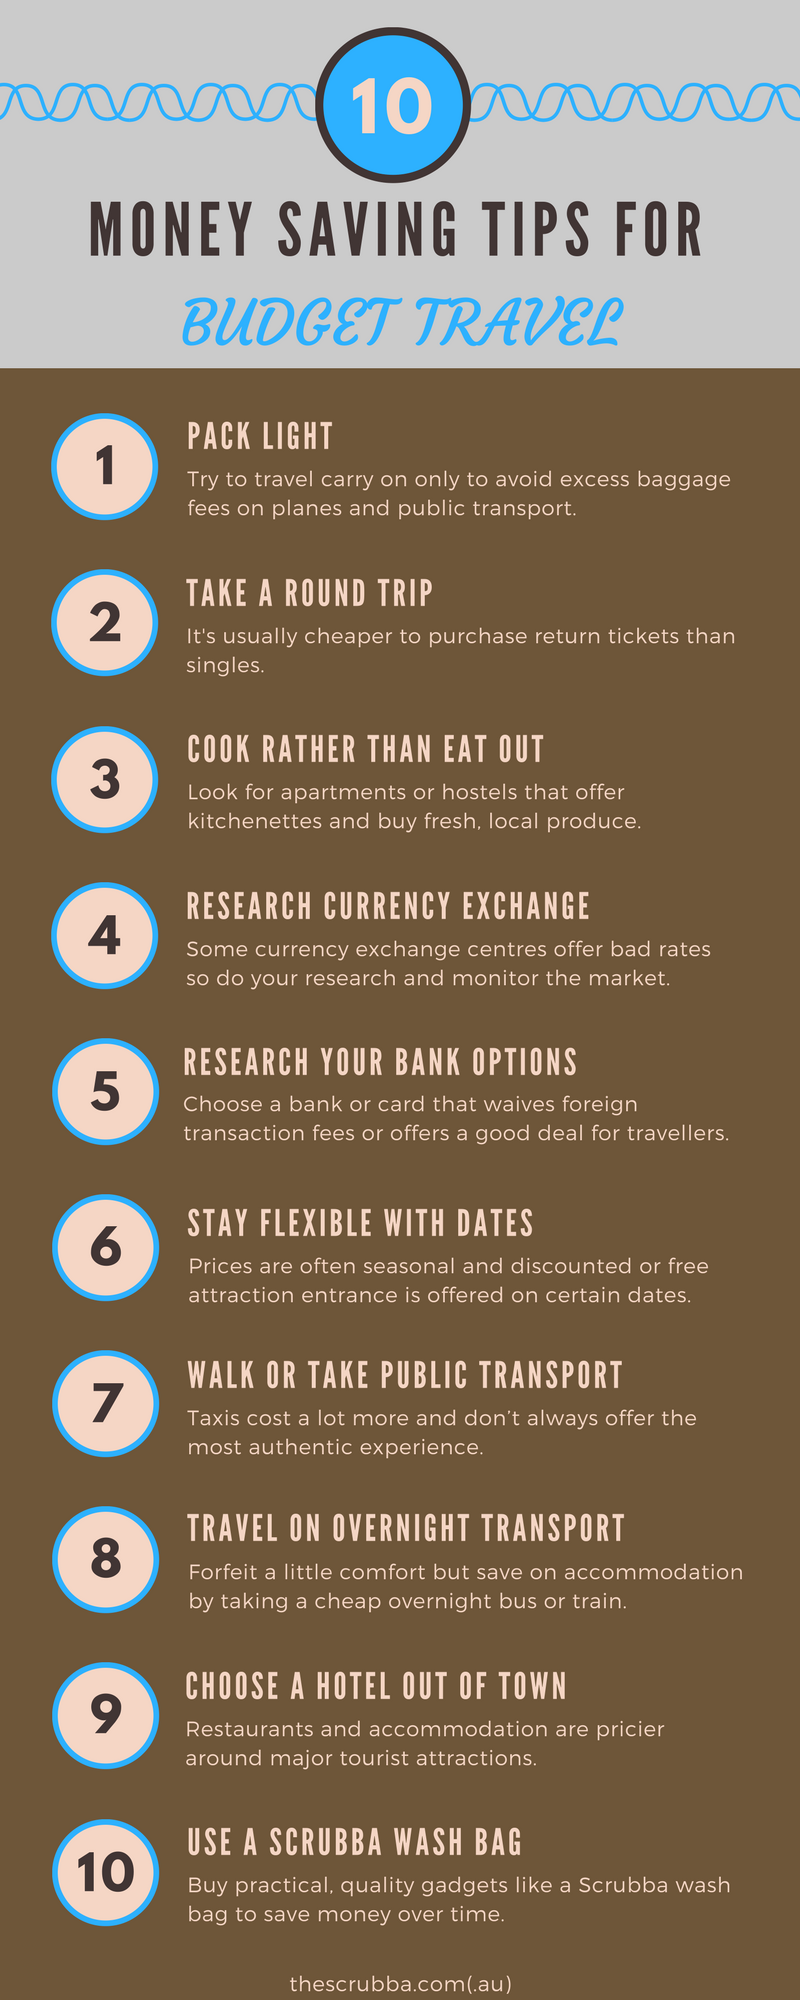 10 Money Saving Tips for Budget Travel Infographic